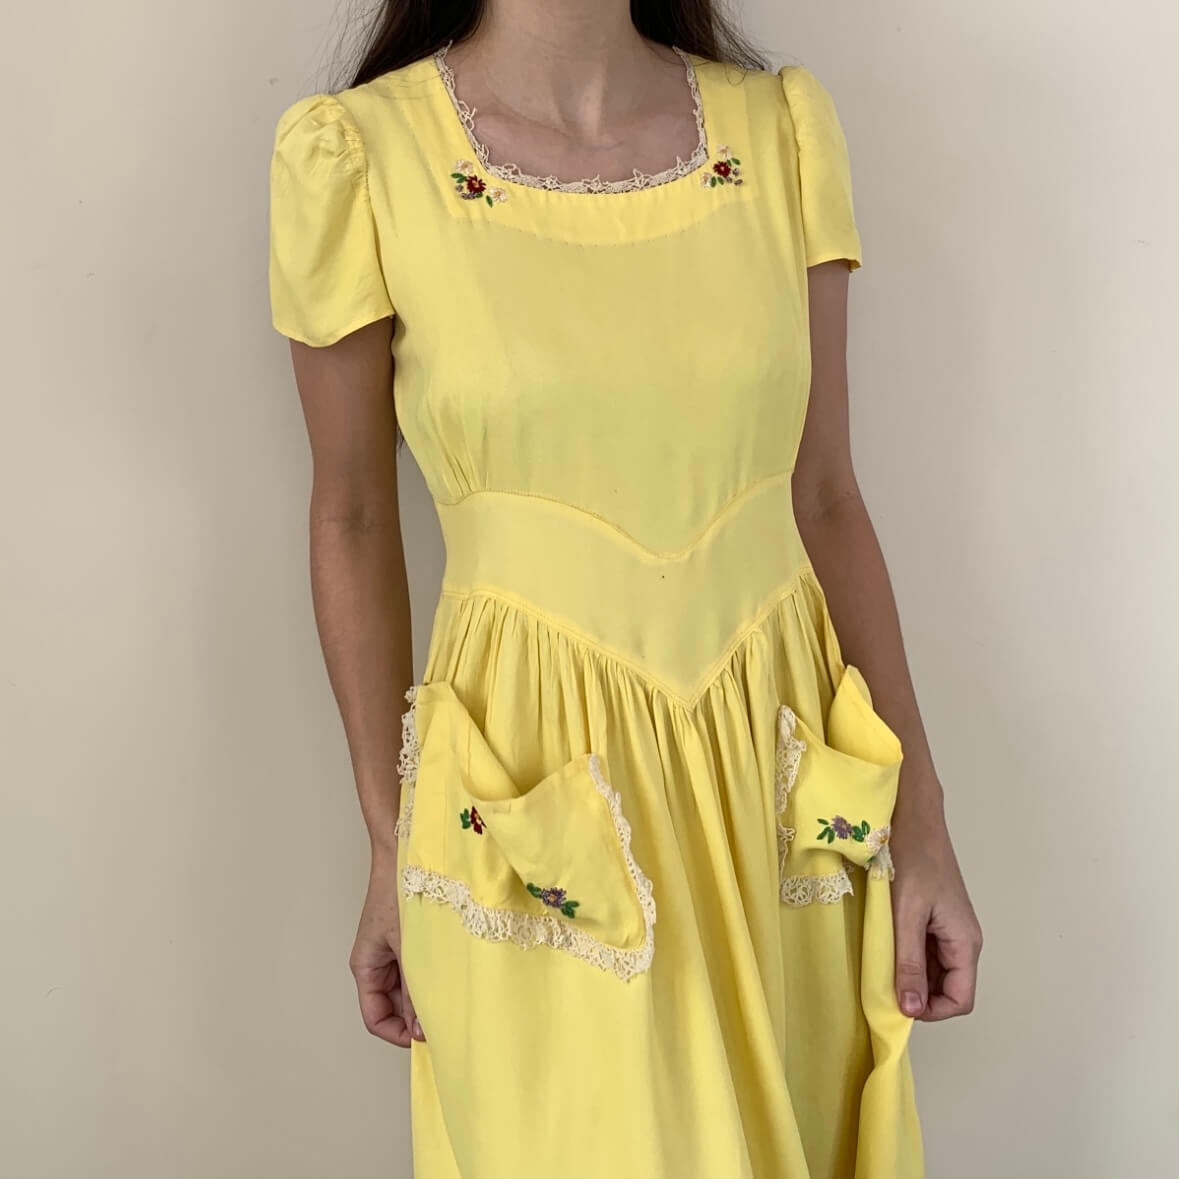 vintage yellow dress additional view on model